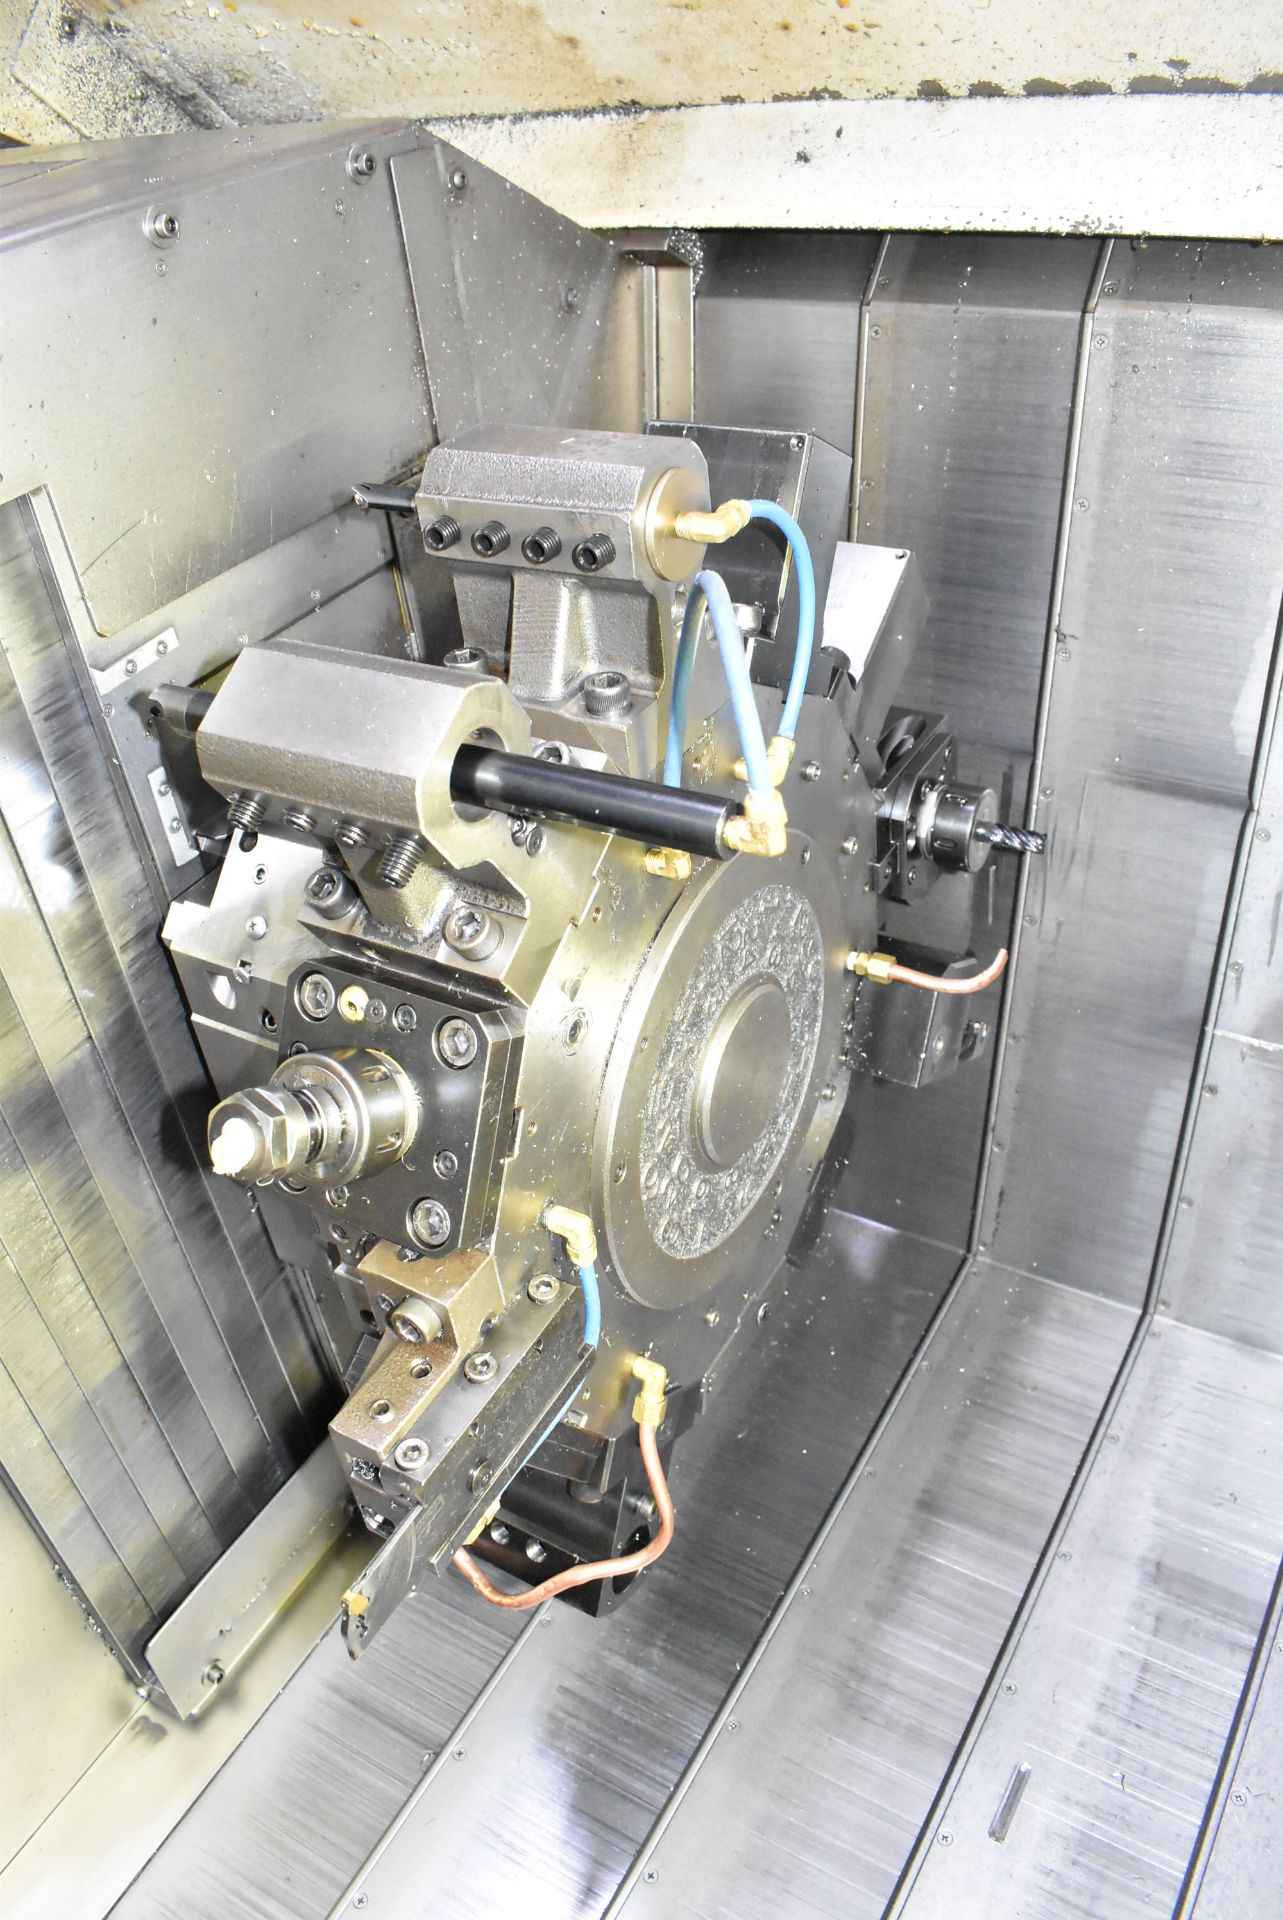 NAKAMURA-TOME (2007) WT-300 MMYS 7-AXIS OPPOSED SPINDLE AND TWIN TURRET CNC MULTI-TASKING CENTER - Image 5 of 15